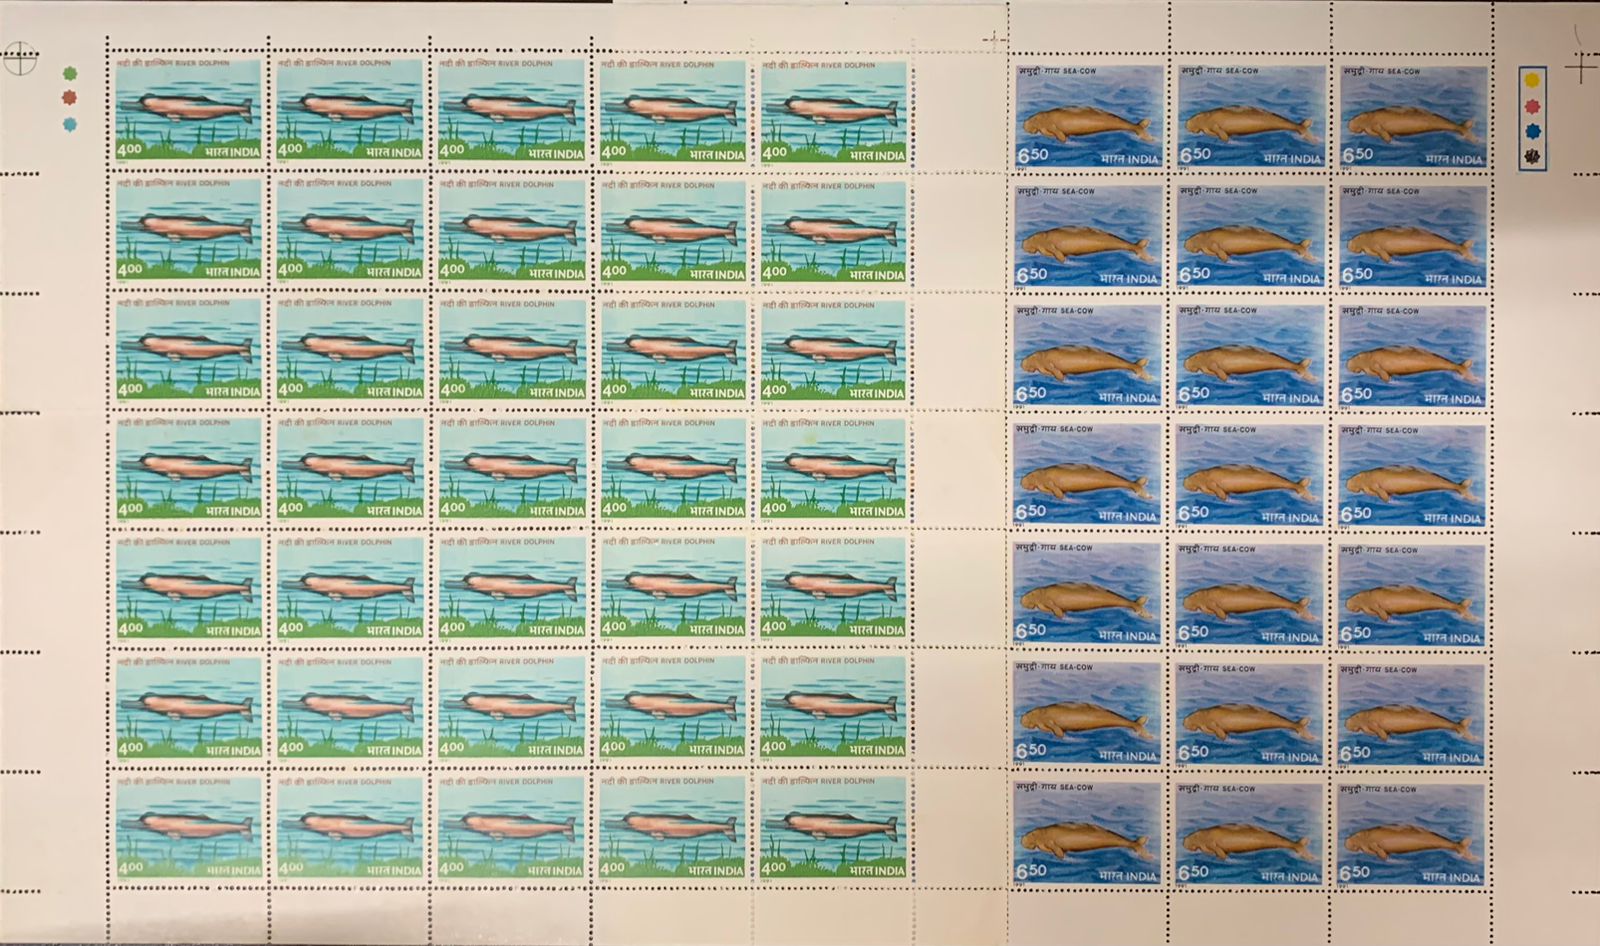 India 1991 River Dolphin & Sea Cow Set of 2 Full Sheet